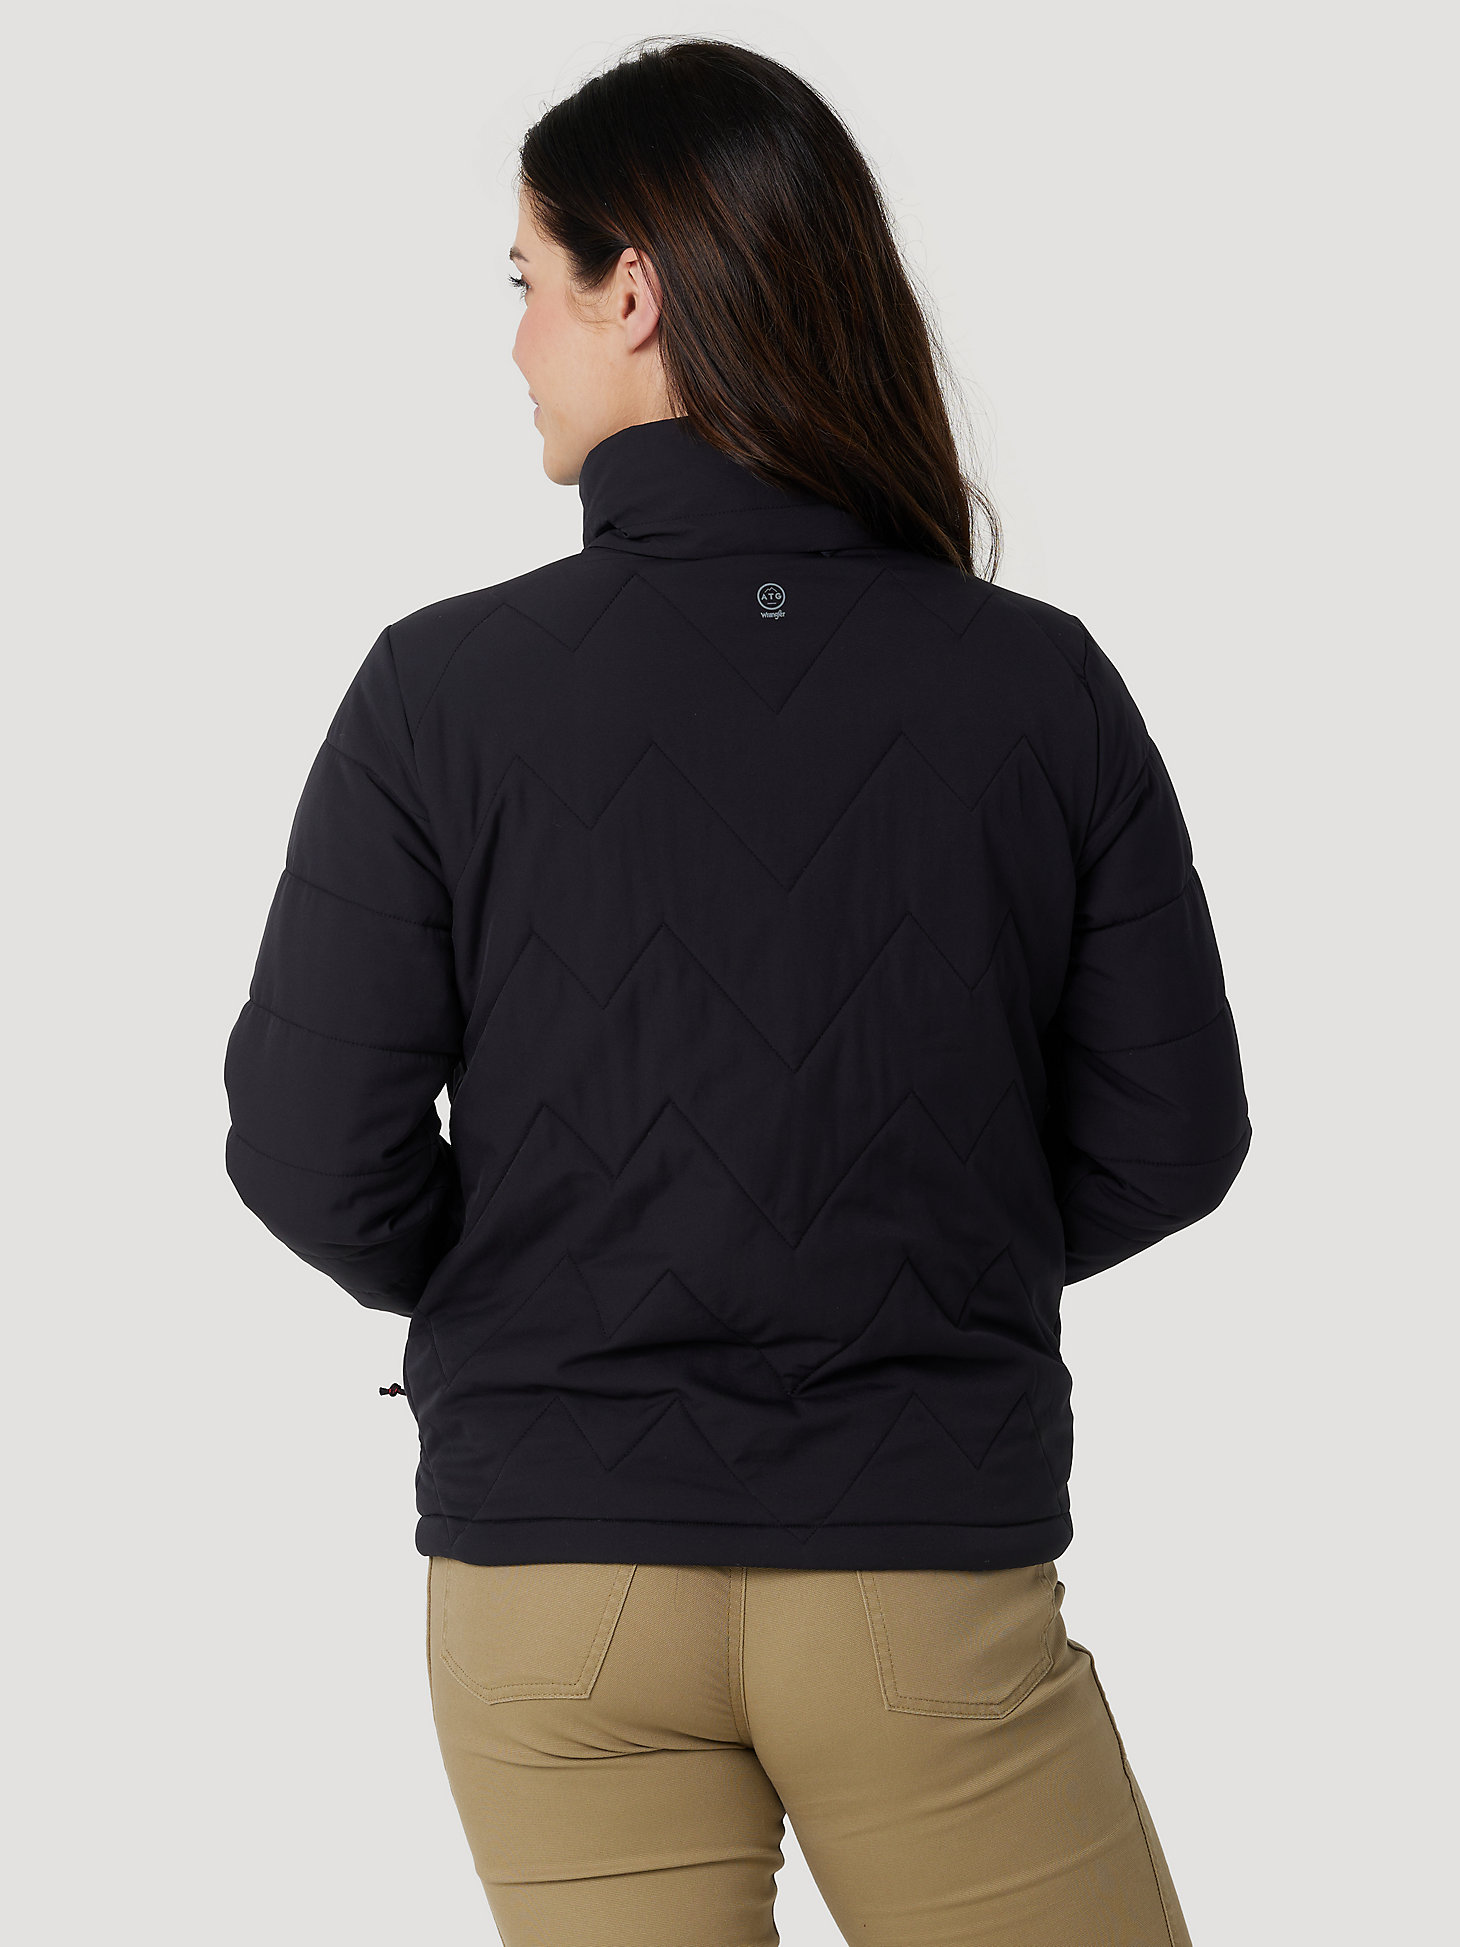 ATG Womens Packable Quilted Jacket:Jet Black:XXL alternative view 3